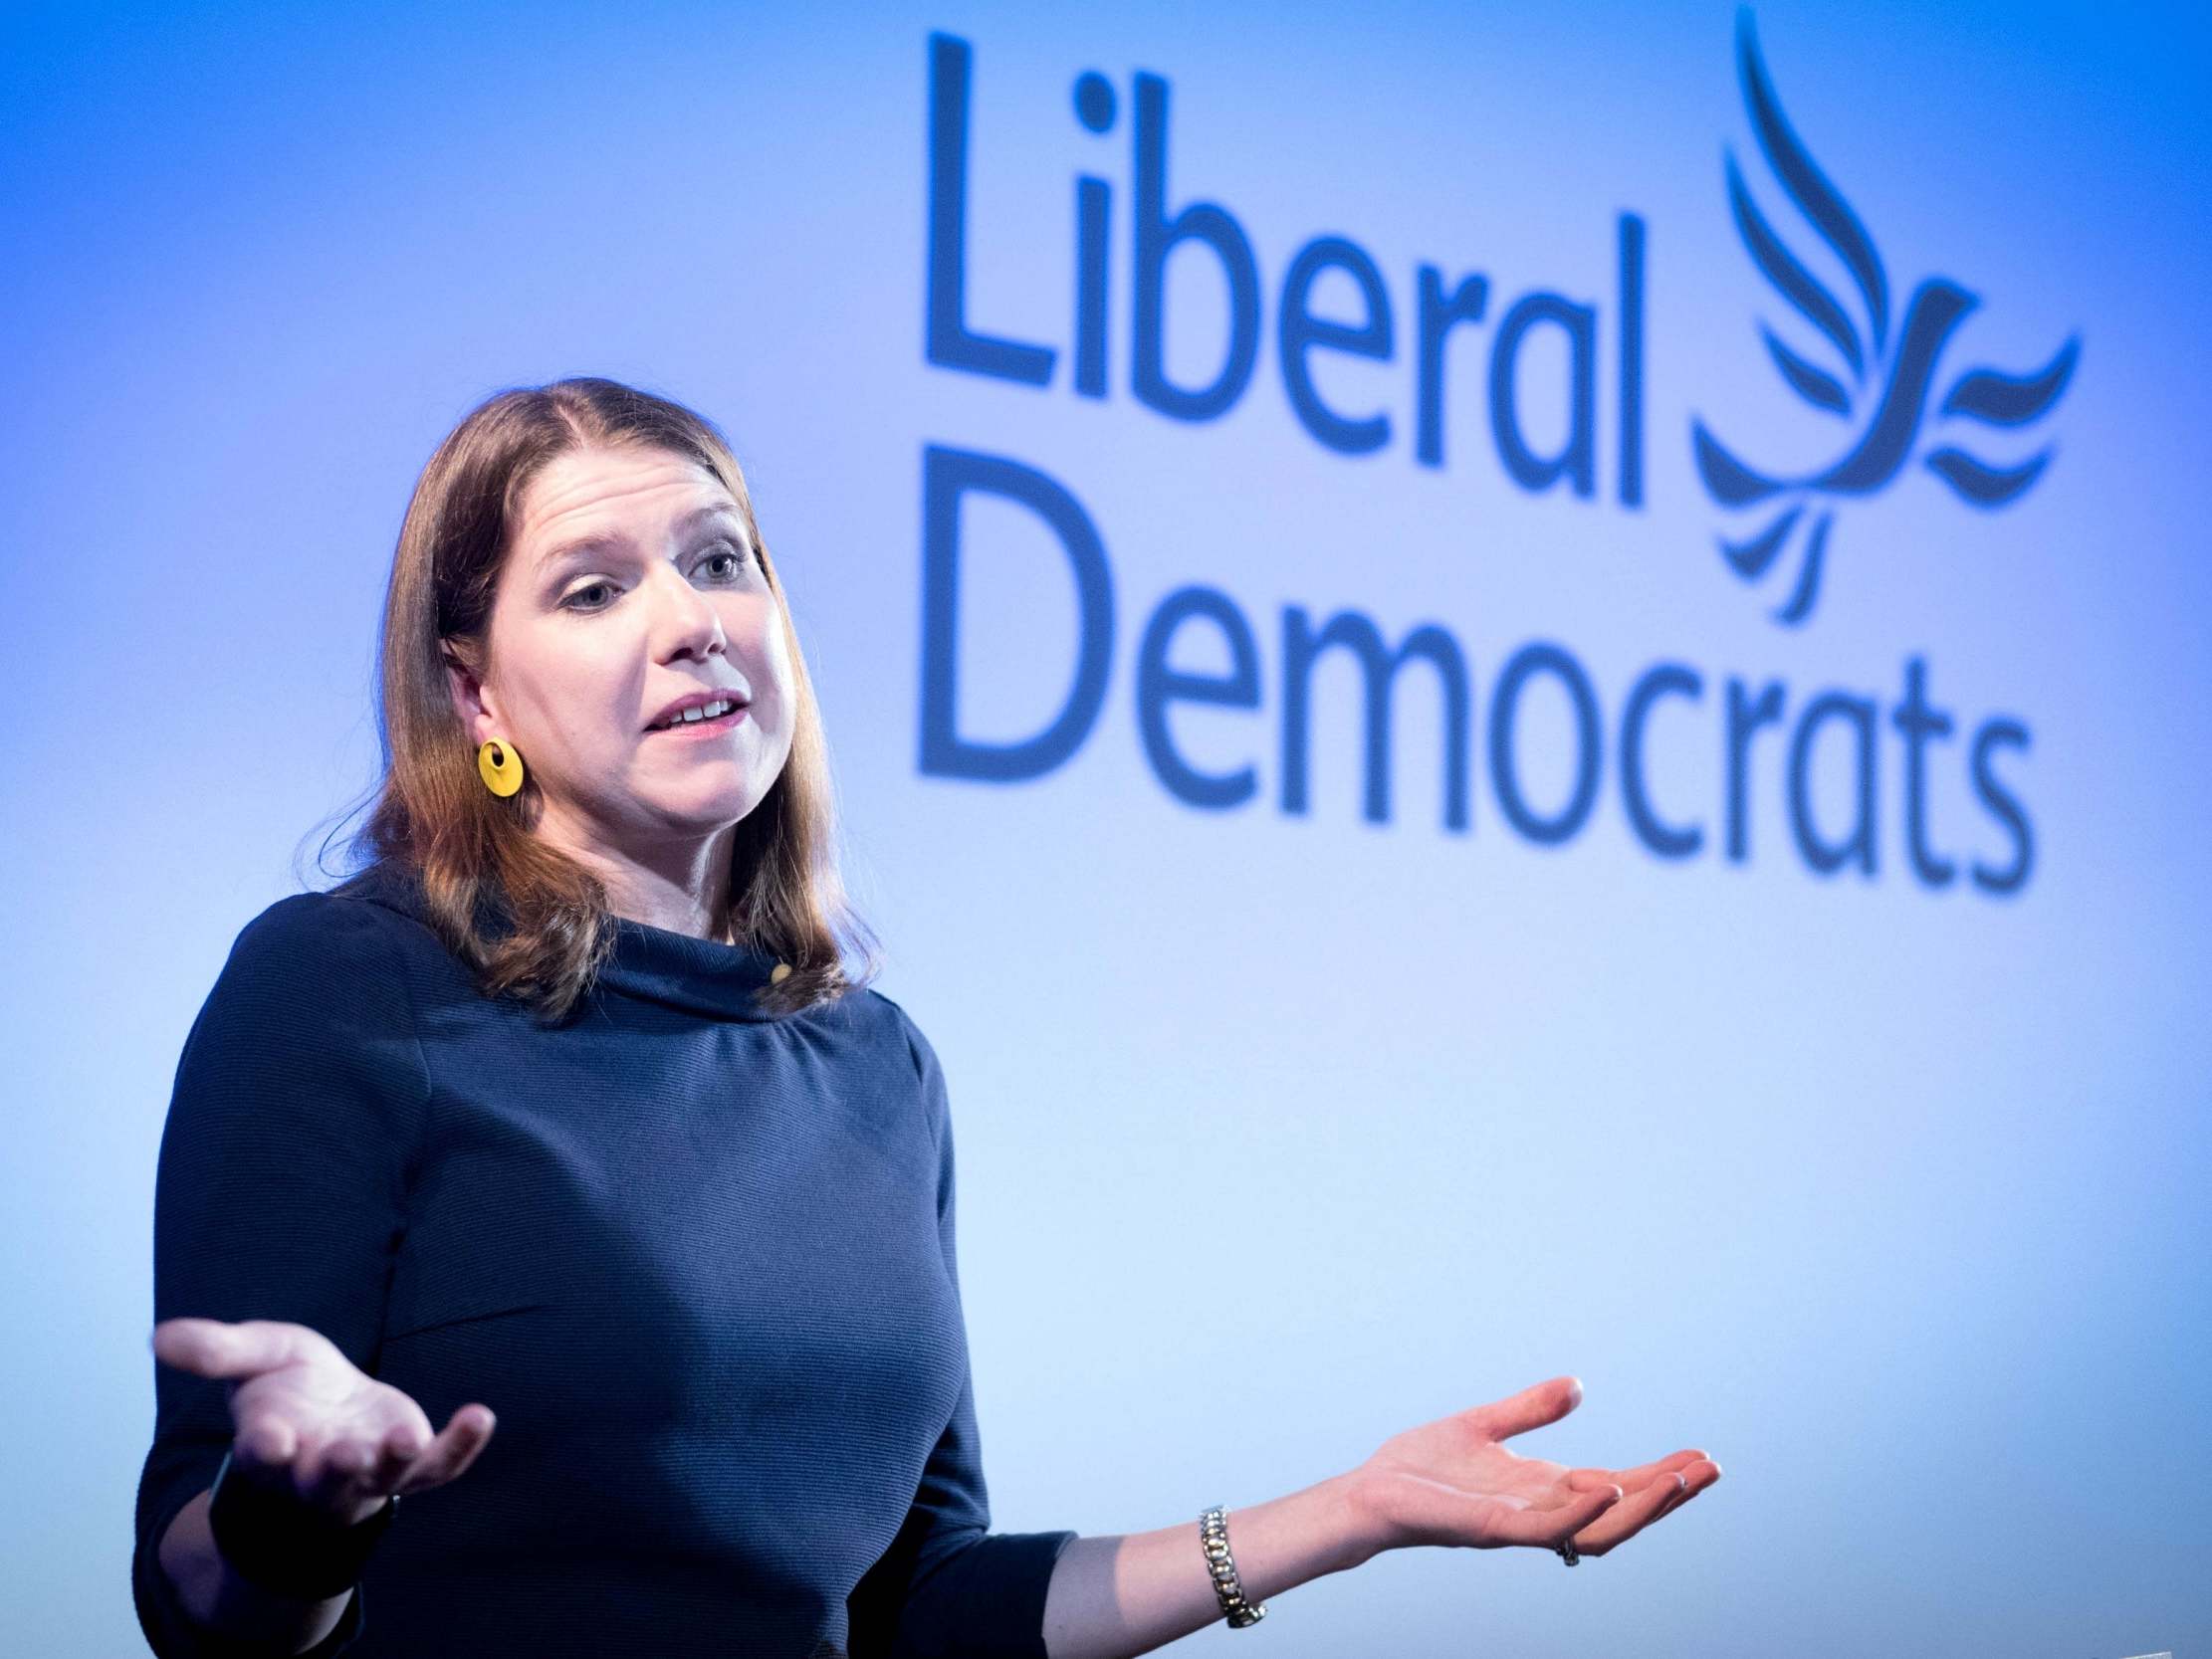 The Lib Dem leader needs to make sure this isn’t another false dawn